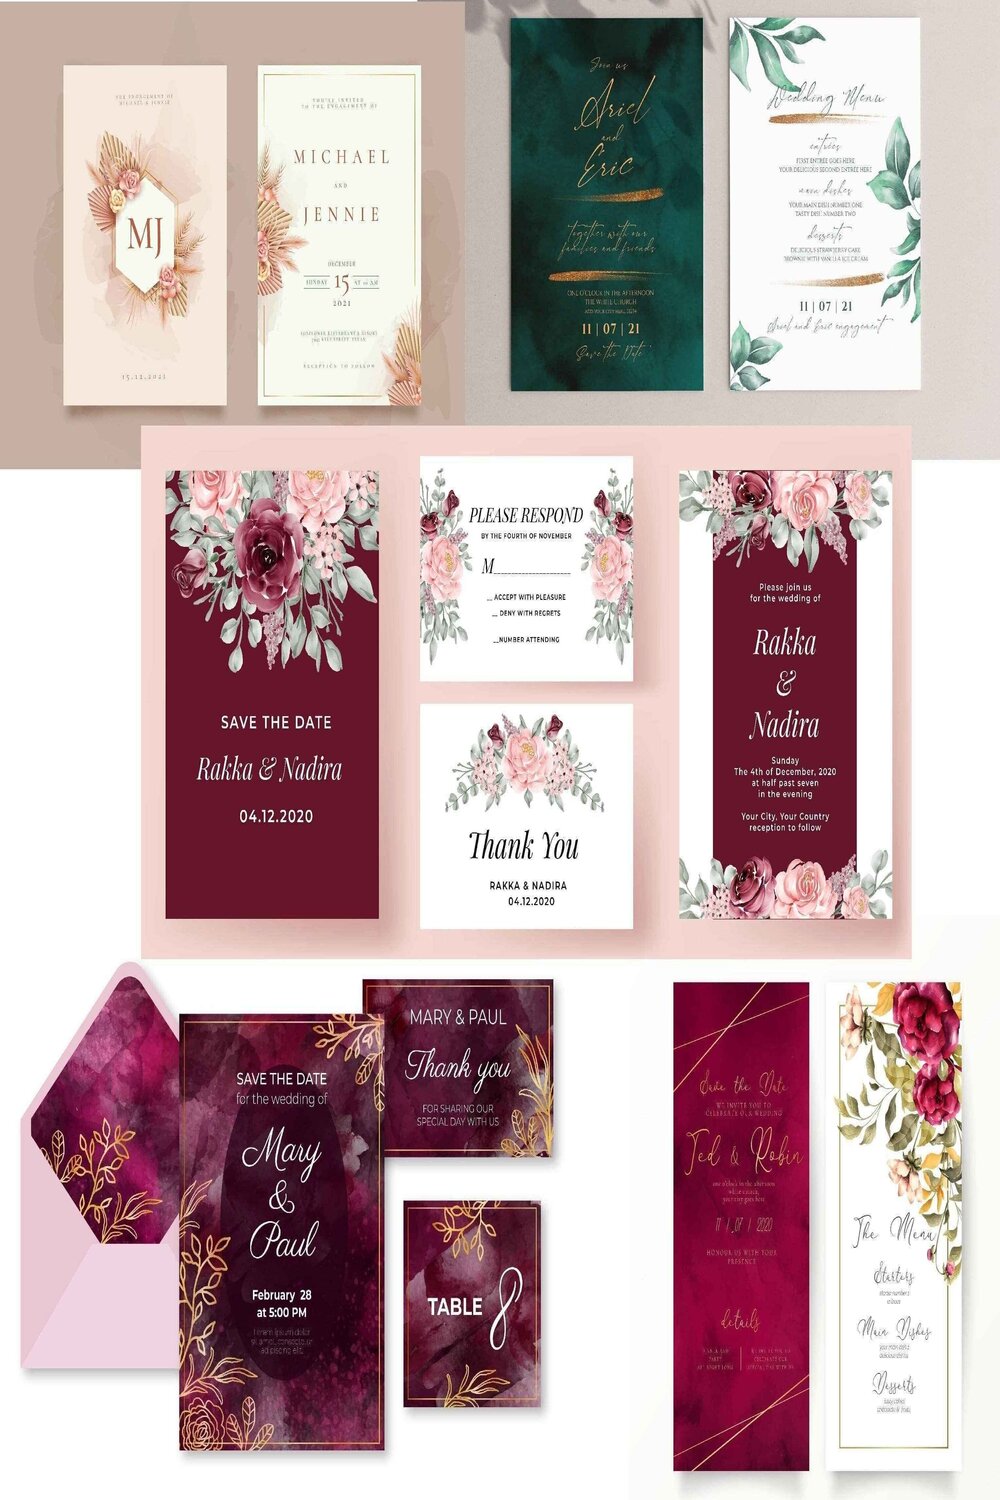 5 Wedding Invitation Card - pinterest image preview.